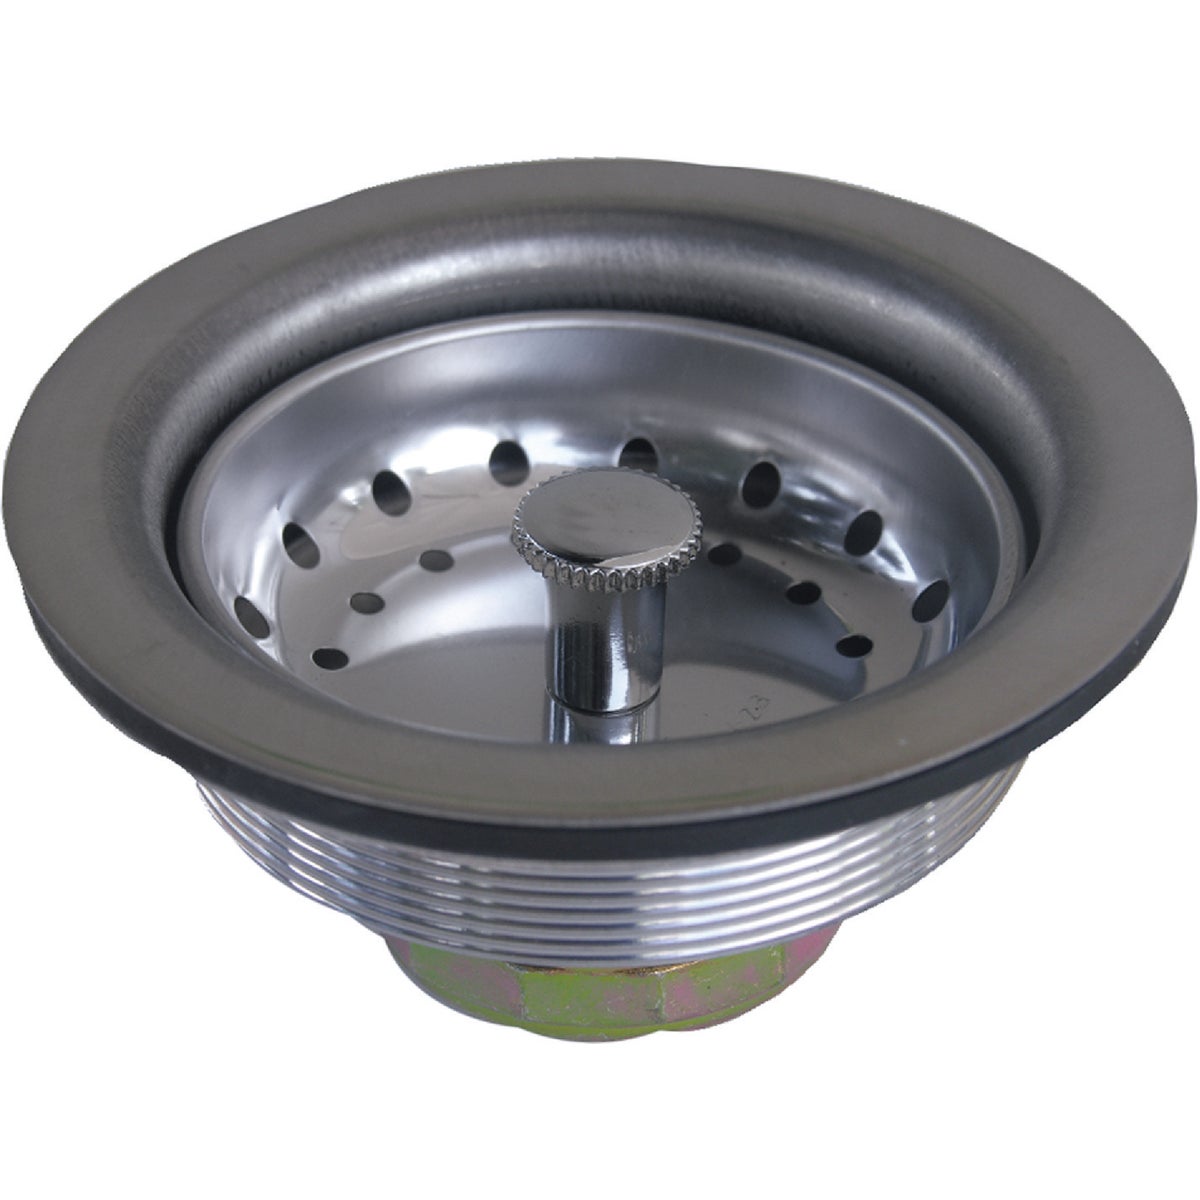 Lasco 3-1/2 In. Chrome Duo Basket Strainer Assembly